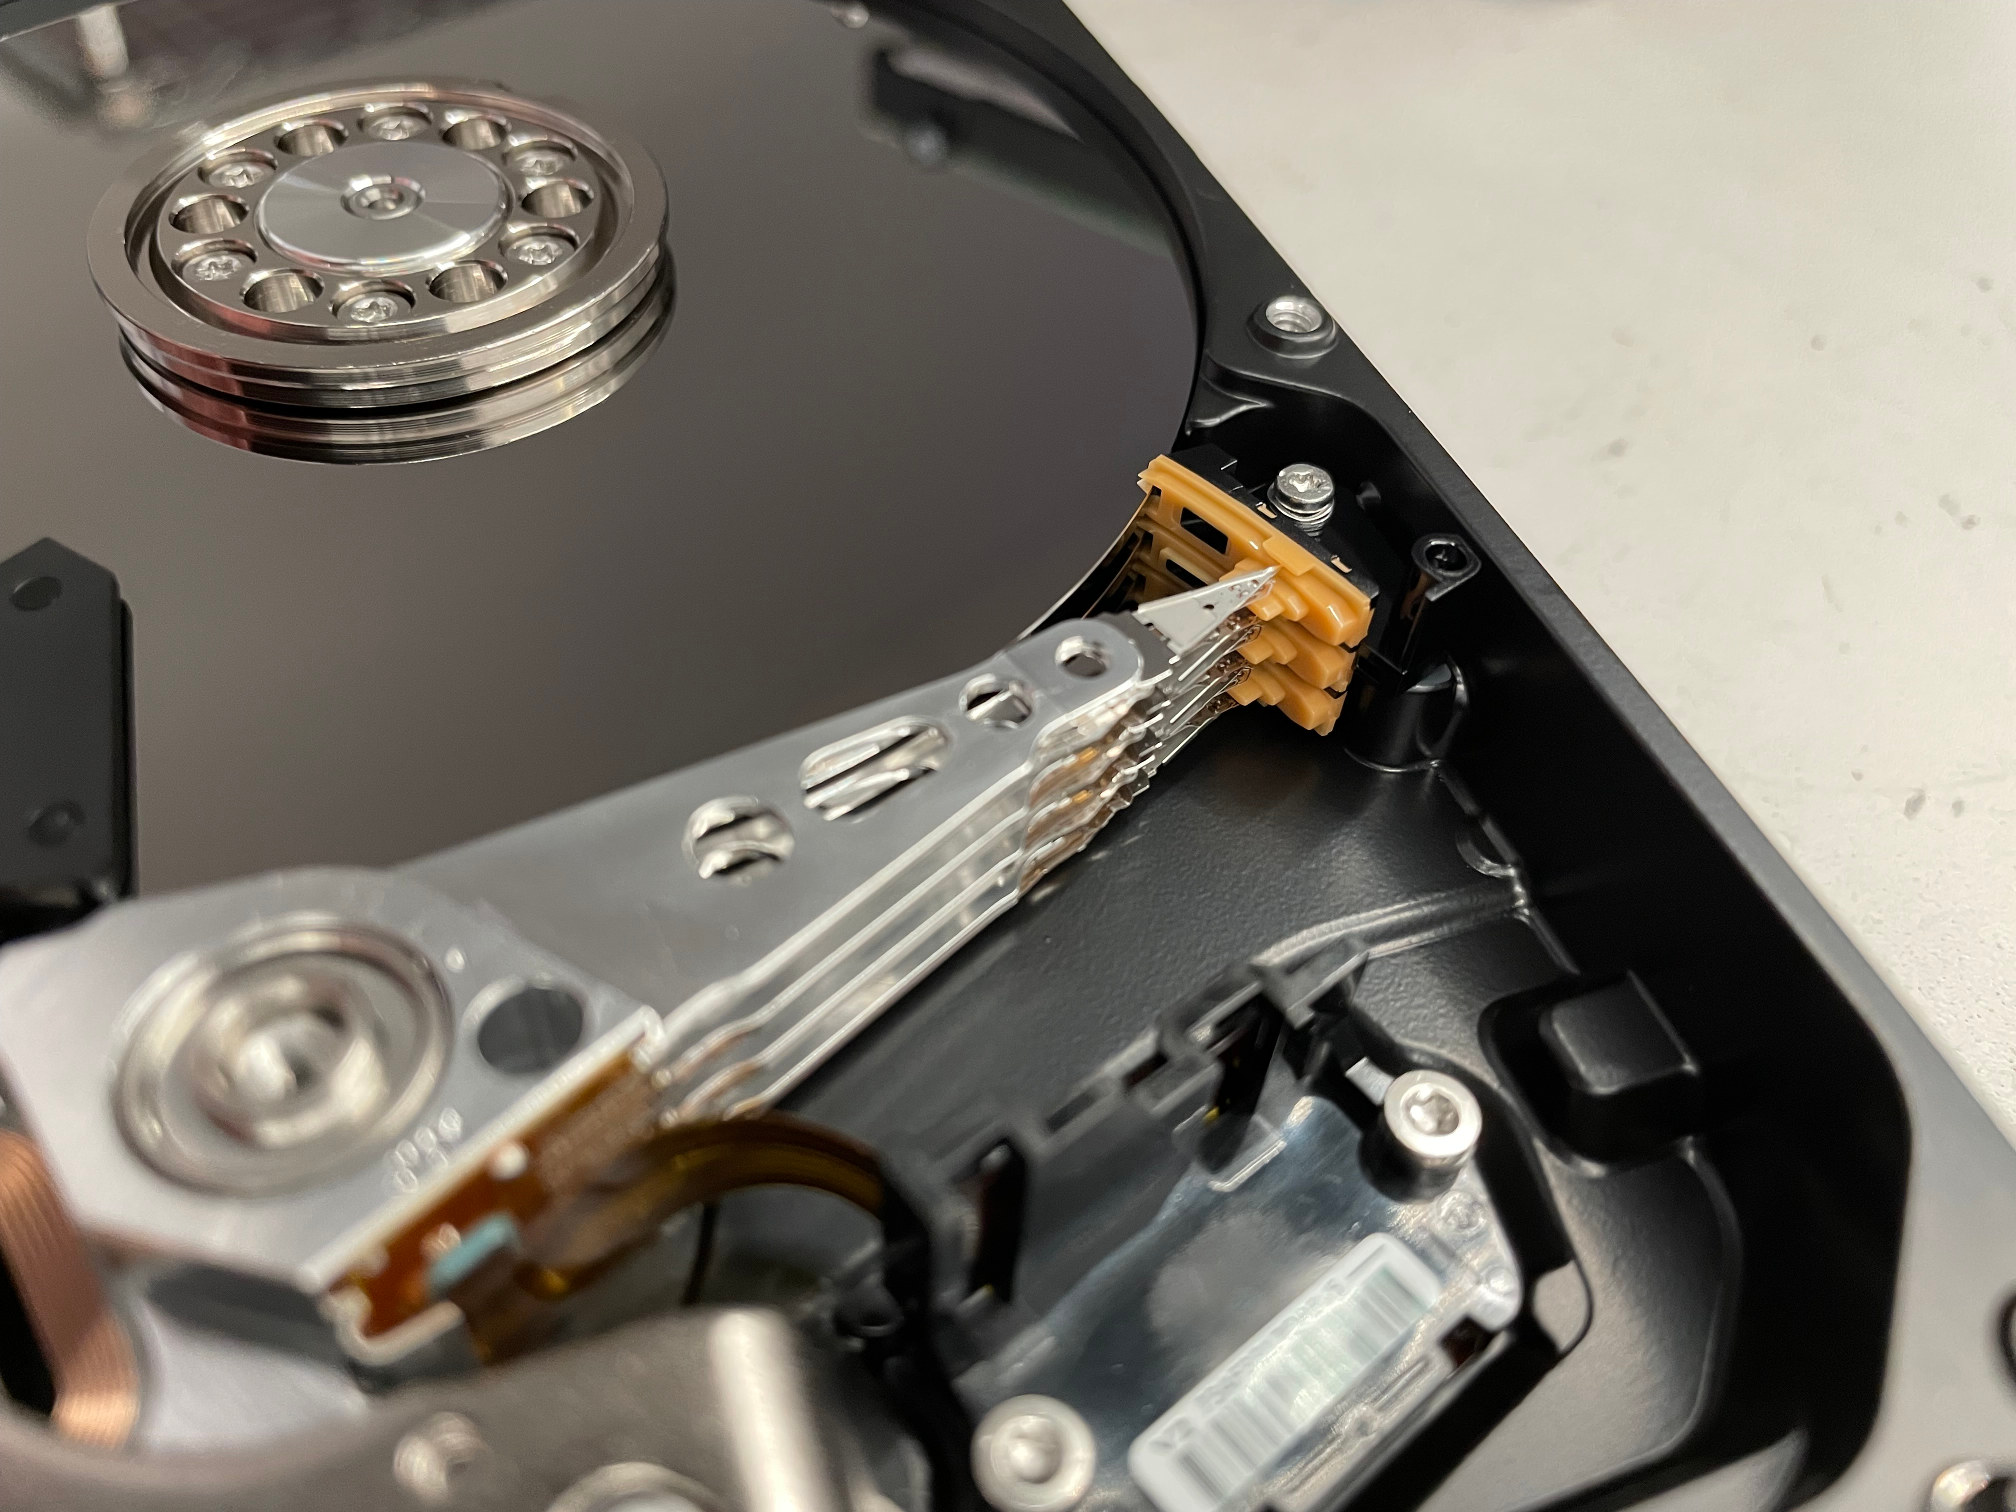 Will a Magnet Destroy a Smartphone or Hard Drive?